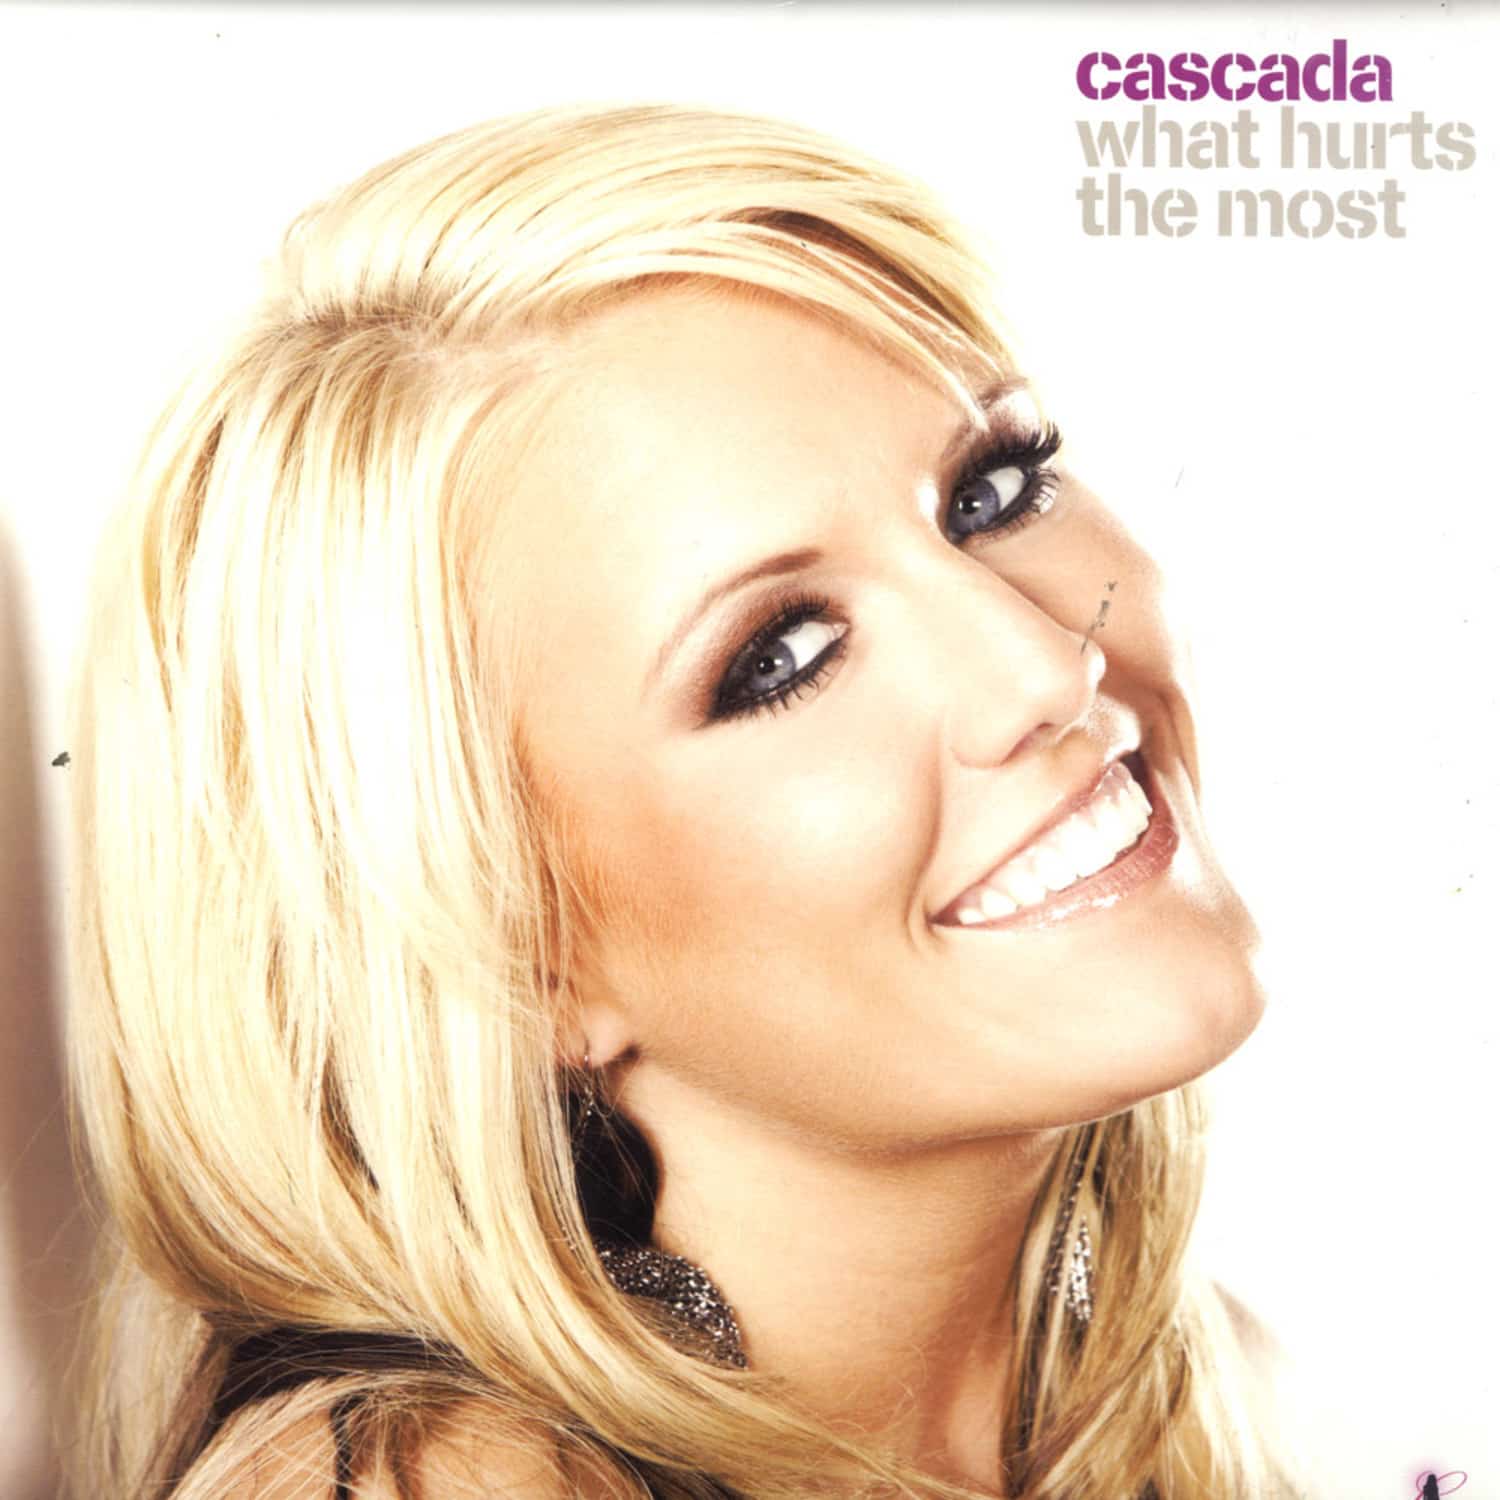 Cascada - WHAT HURTS THE MOST